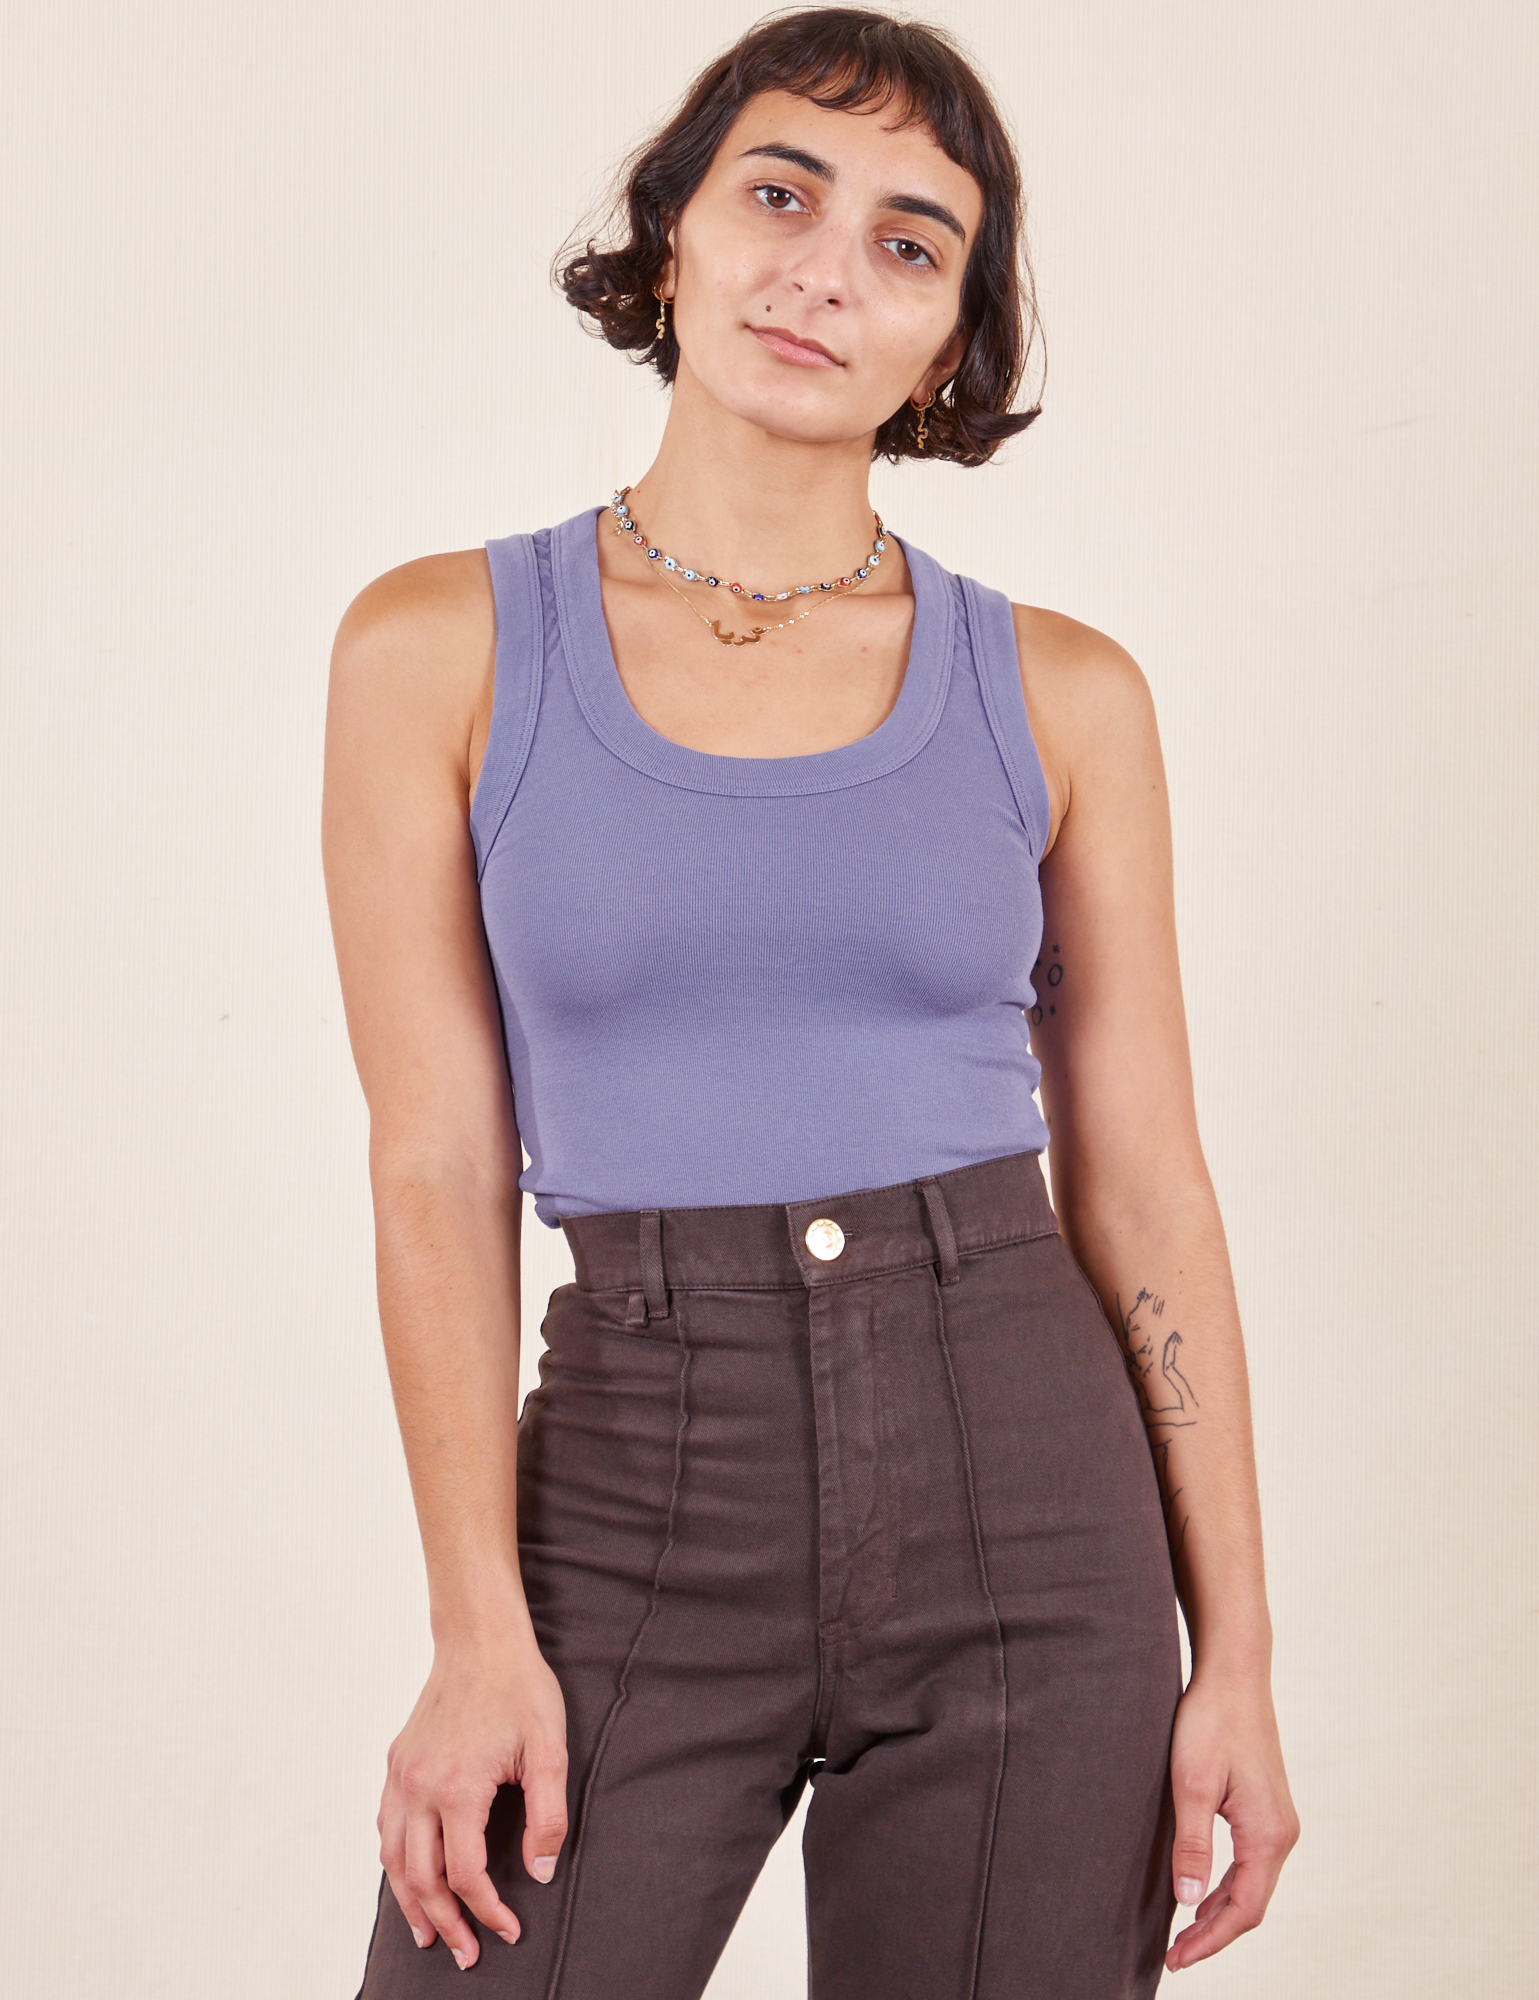 Soraya is wearing P Tank Top in Faded Grape paired with espresso brown Western Pants